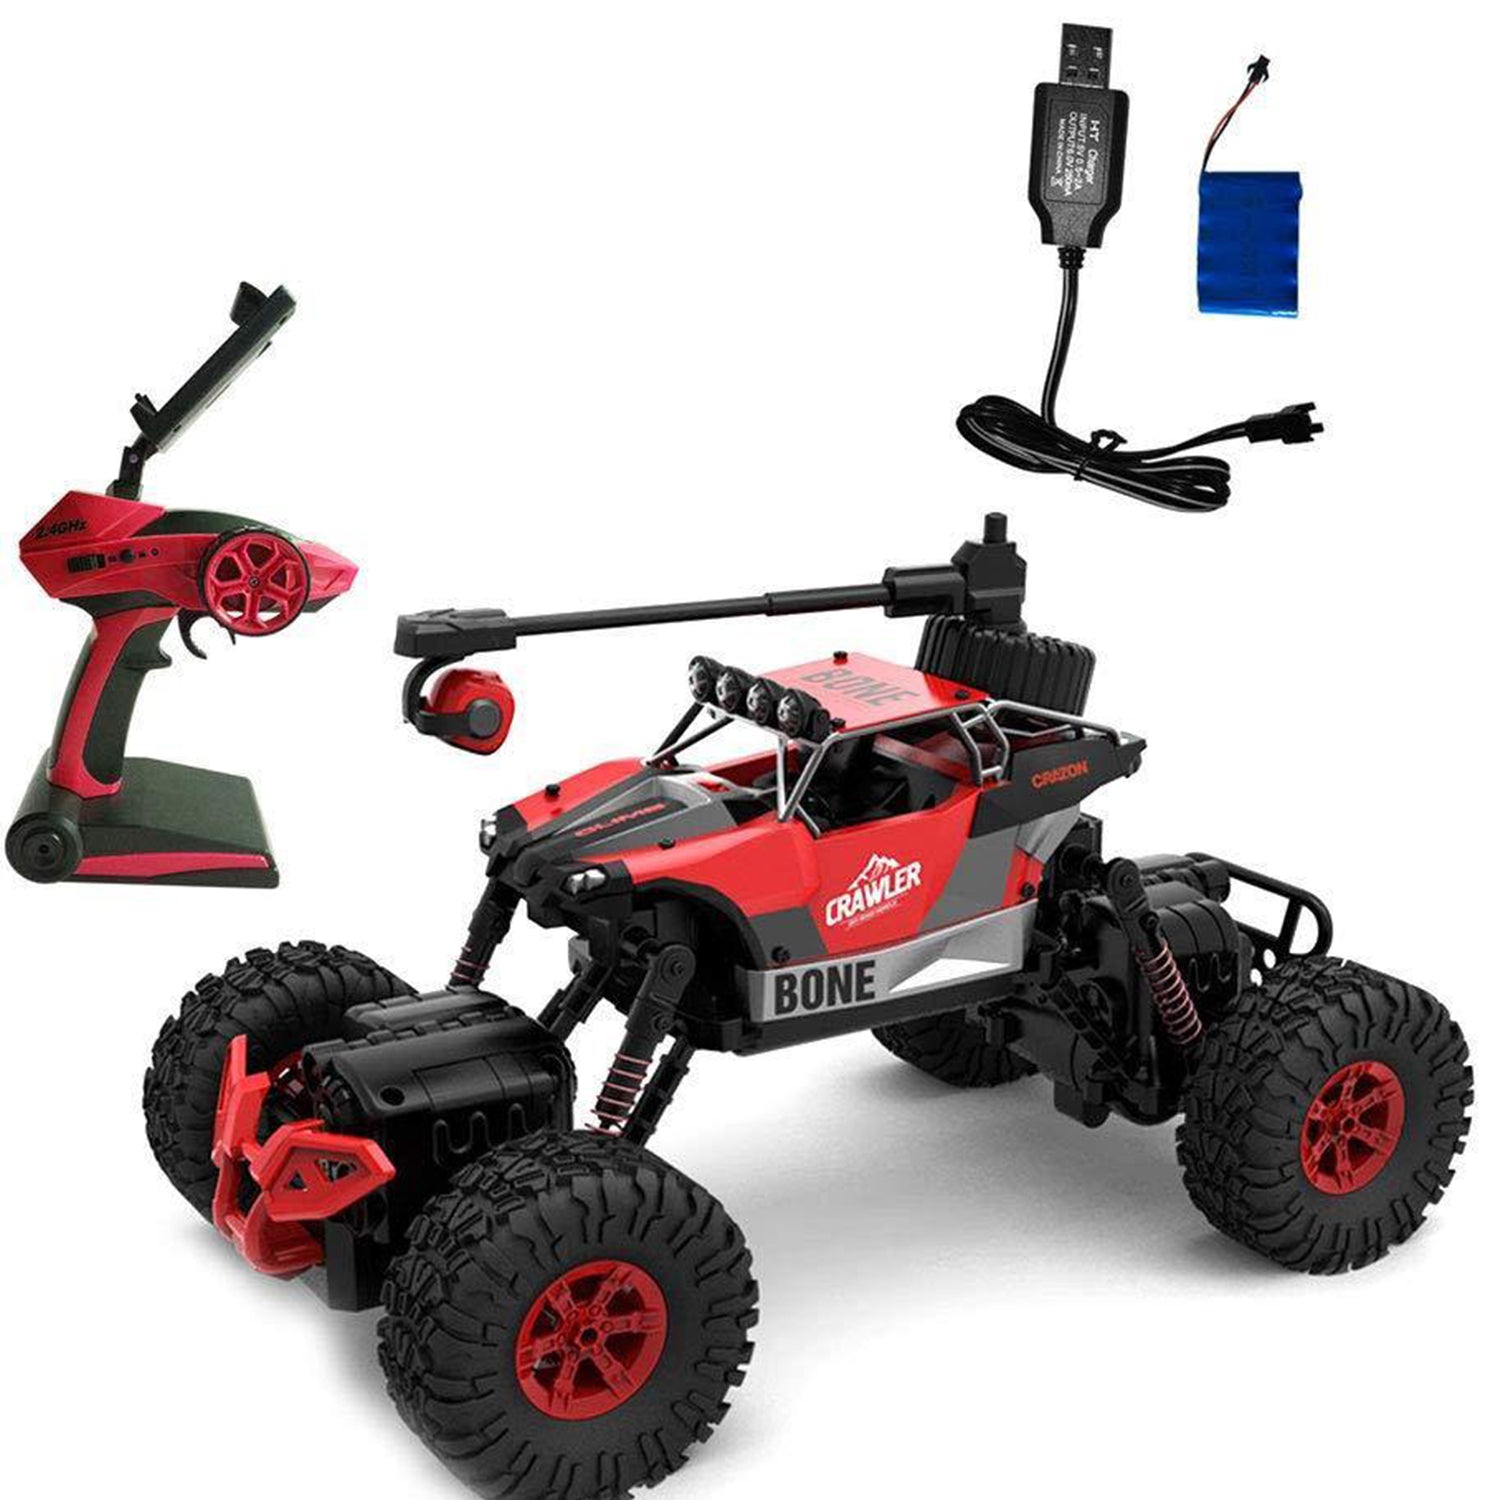 1:16 RC Car 4WD 2.4Ghz Off-Road Rock Crawler Truck w/ Wifi 0.3MP Camera, Red